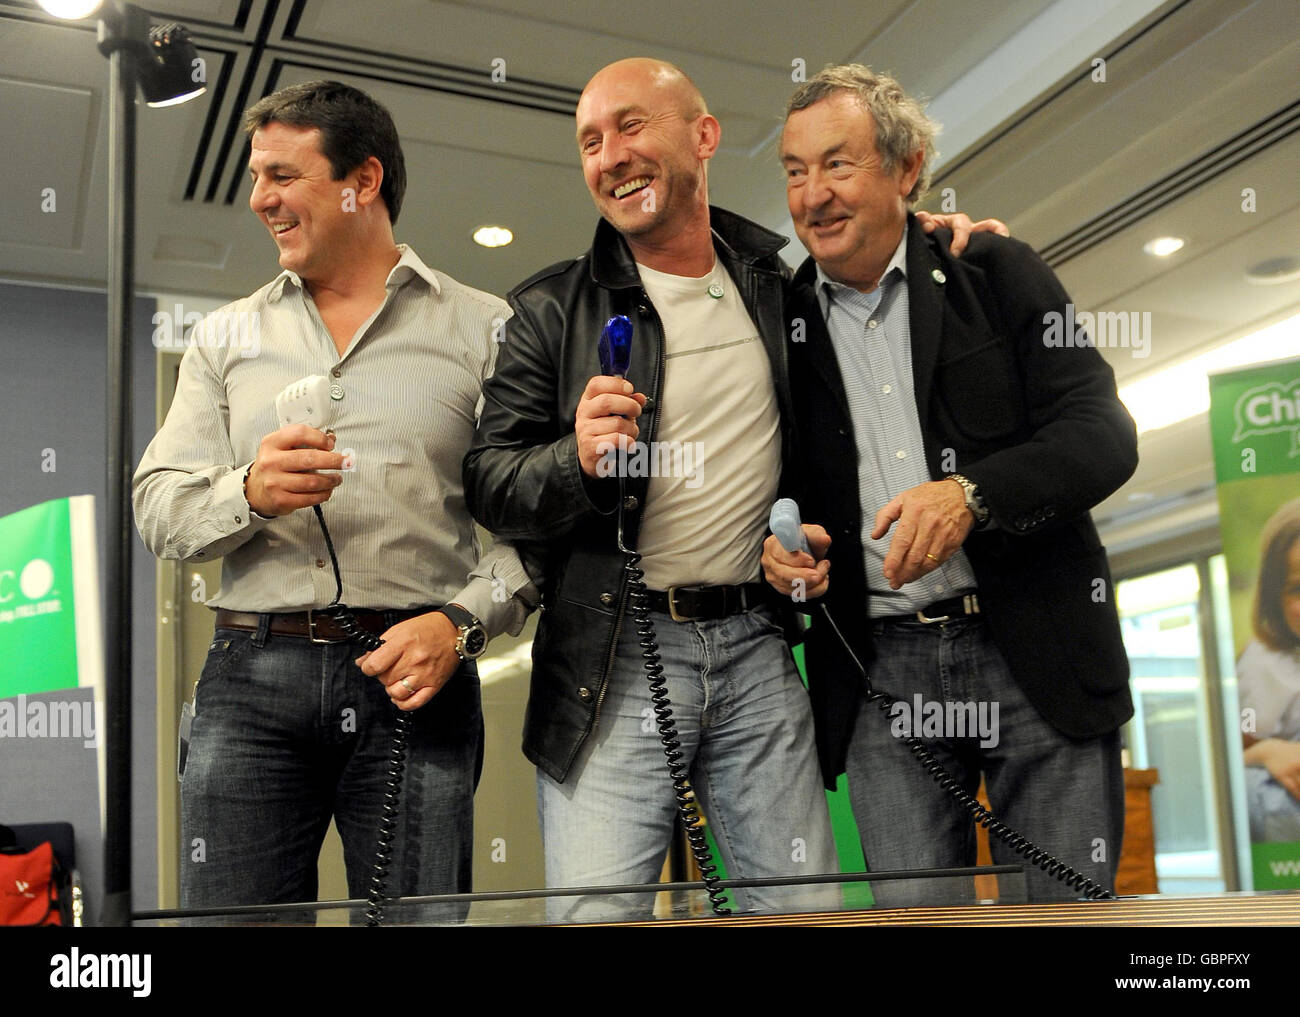 Løft dig op uhyre web left to right) Mark Blundell, Perry McCarthy (the original Top Gear Stig)  and Nick Mason compete against each other on a Scalextric track during the  NSPCC's Child's Voice Appeal Circuit Launch, London